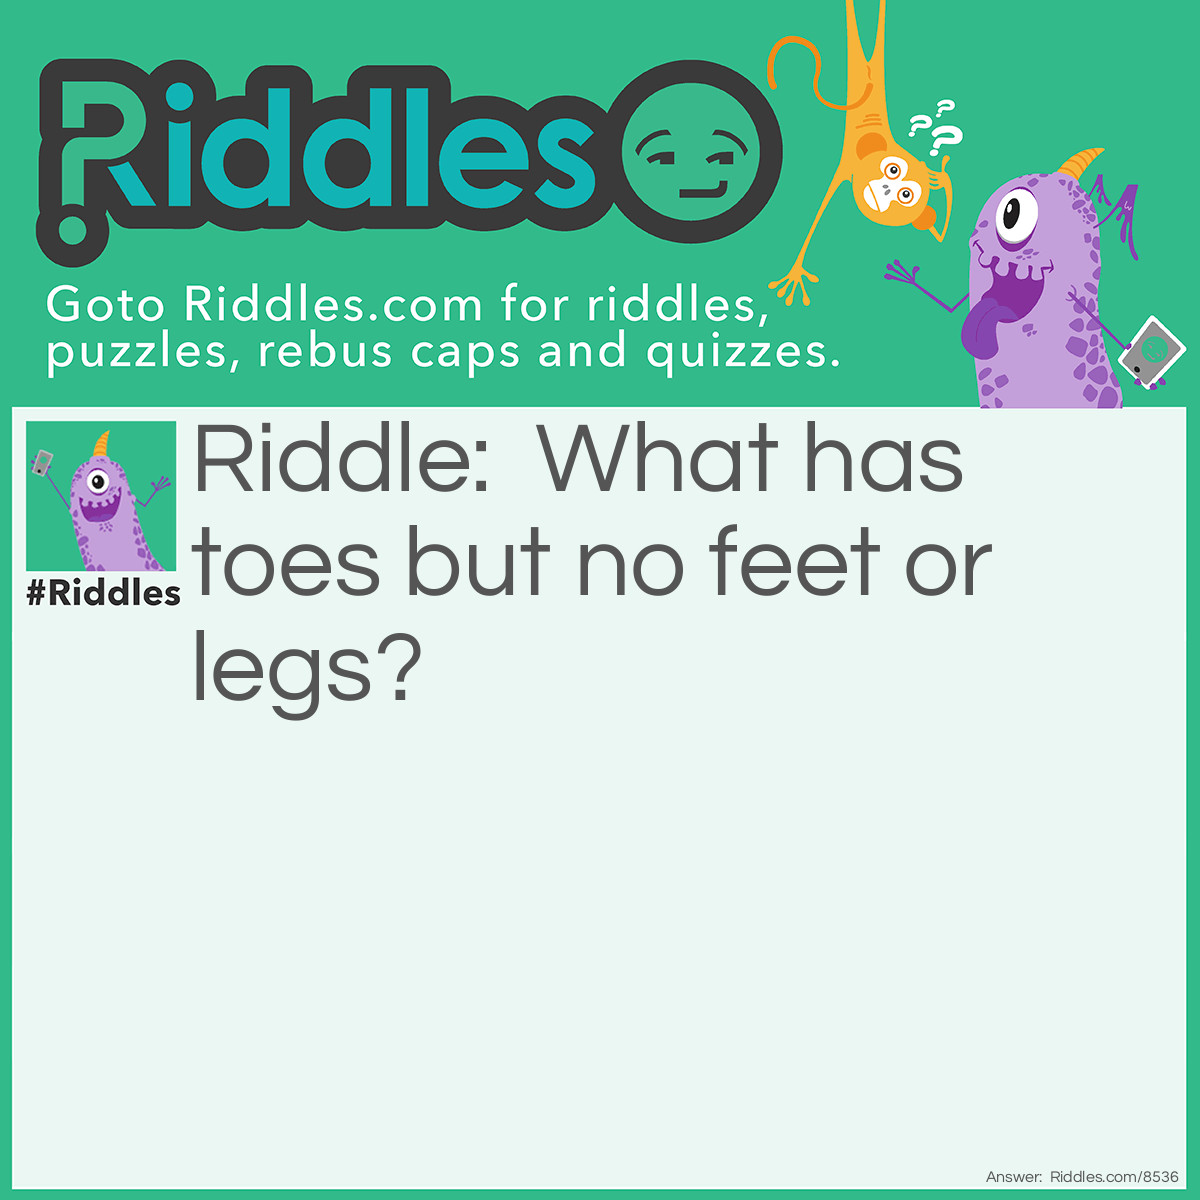 Riddle: What has toes but no feet or legs? Answer: Tomatoes.